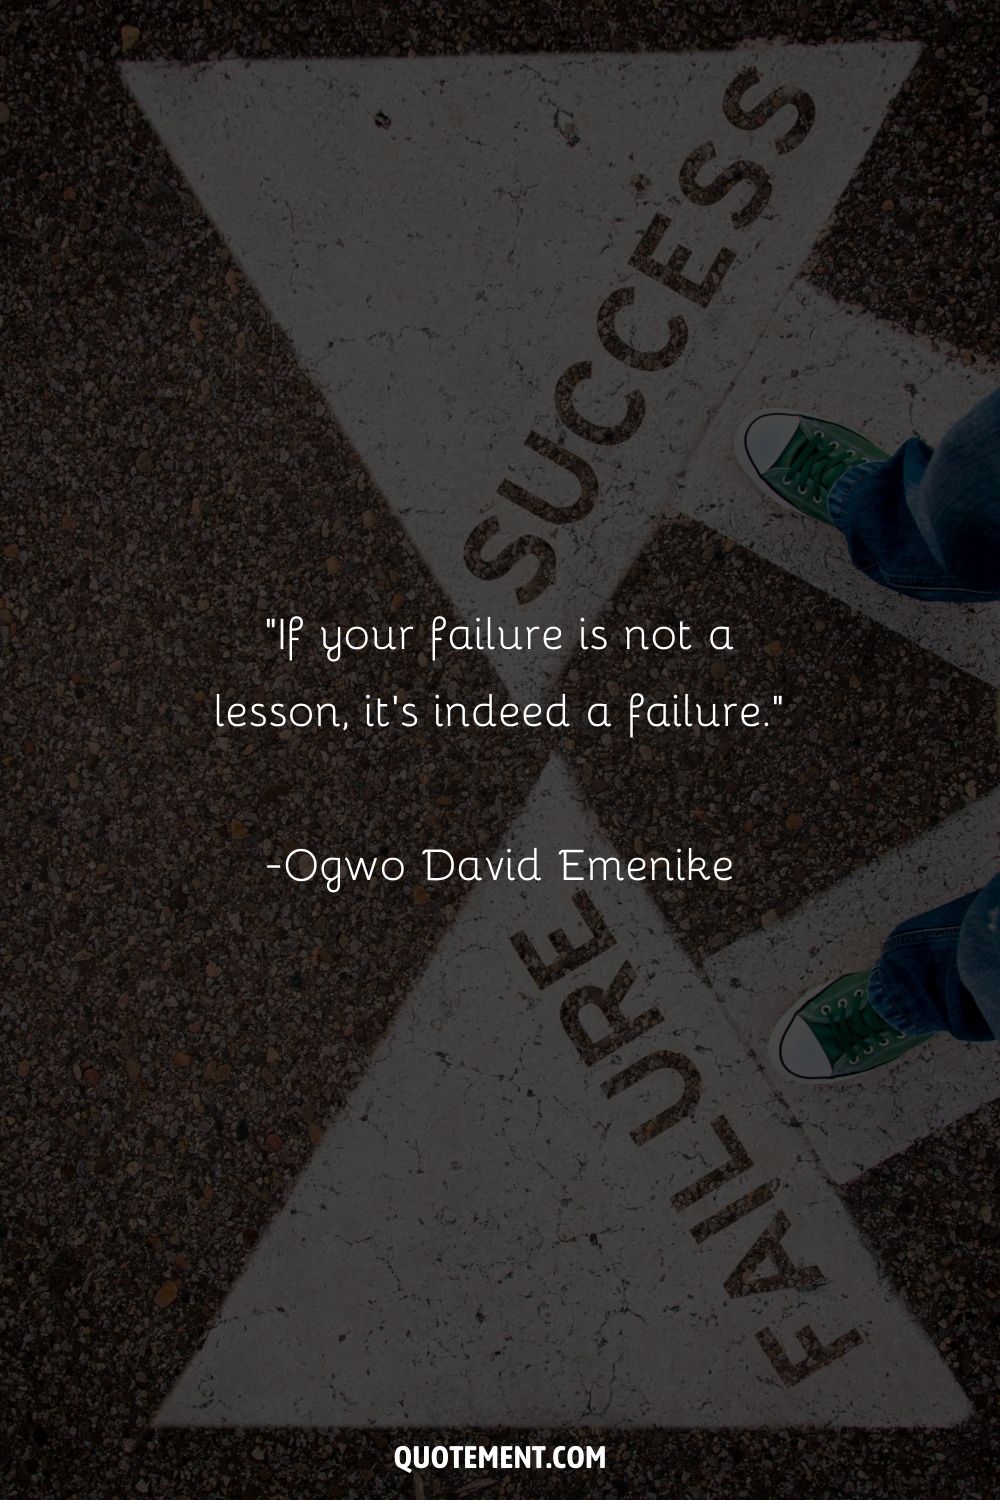 “If your failure is not a lesson, it's indeed a failure.” ― Ogwo David Emenike, The Fortune in Failing Decoding the Message of Failure